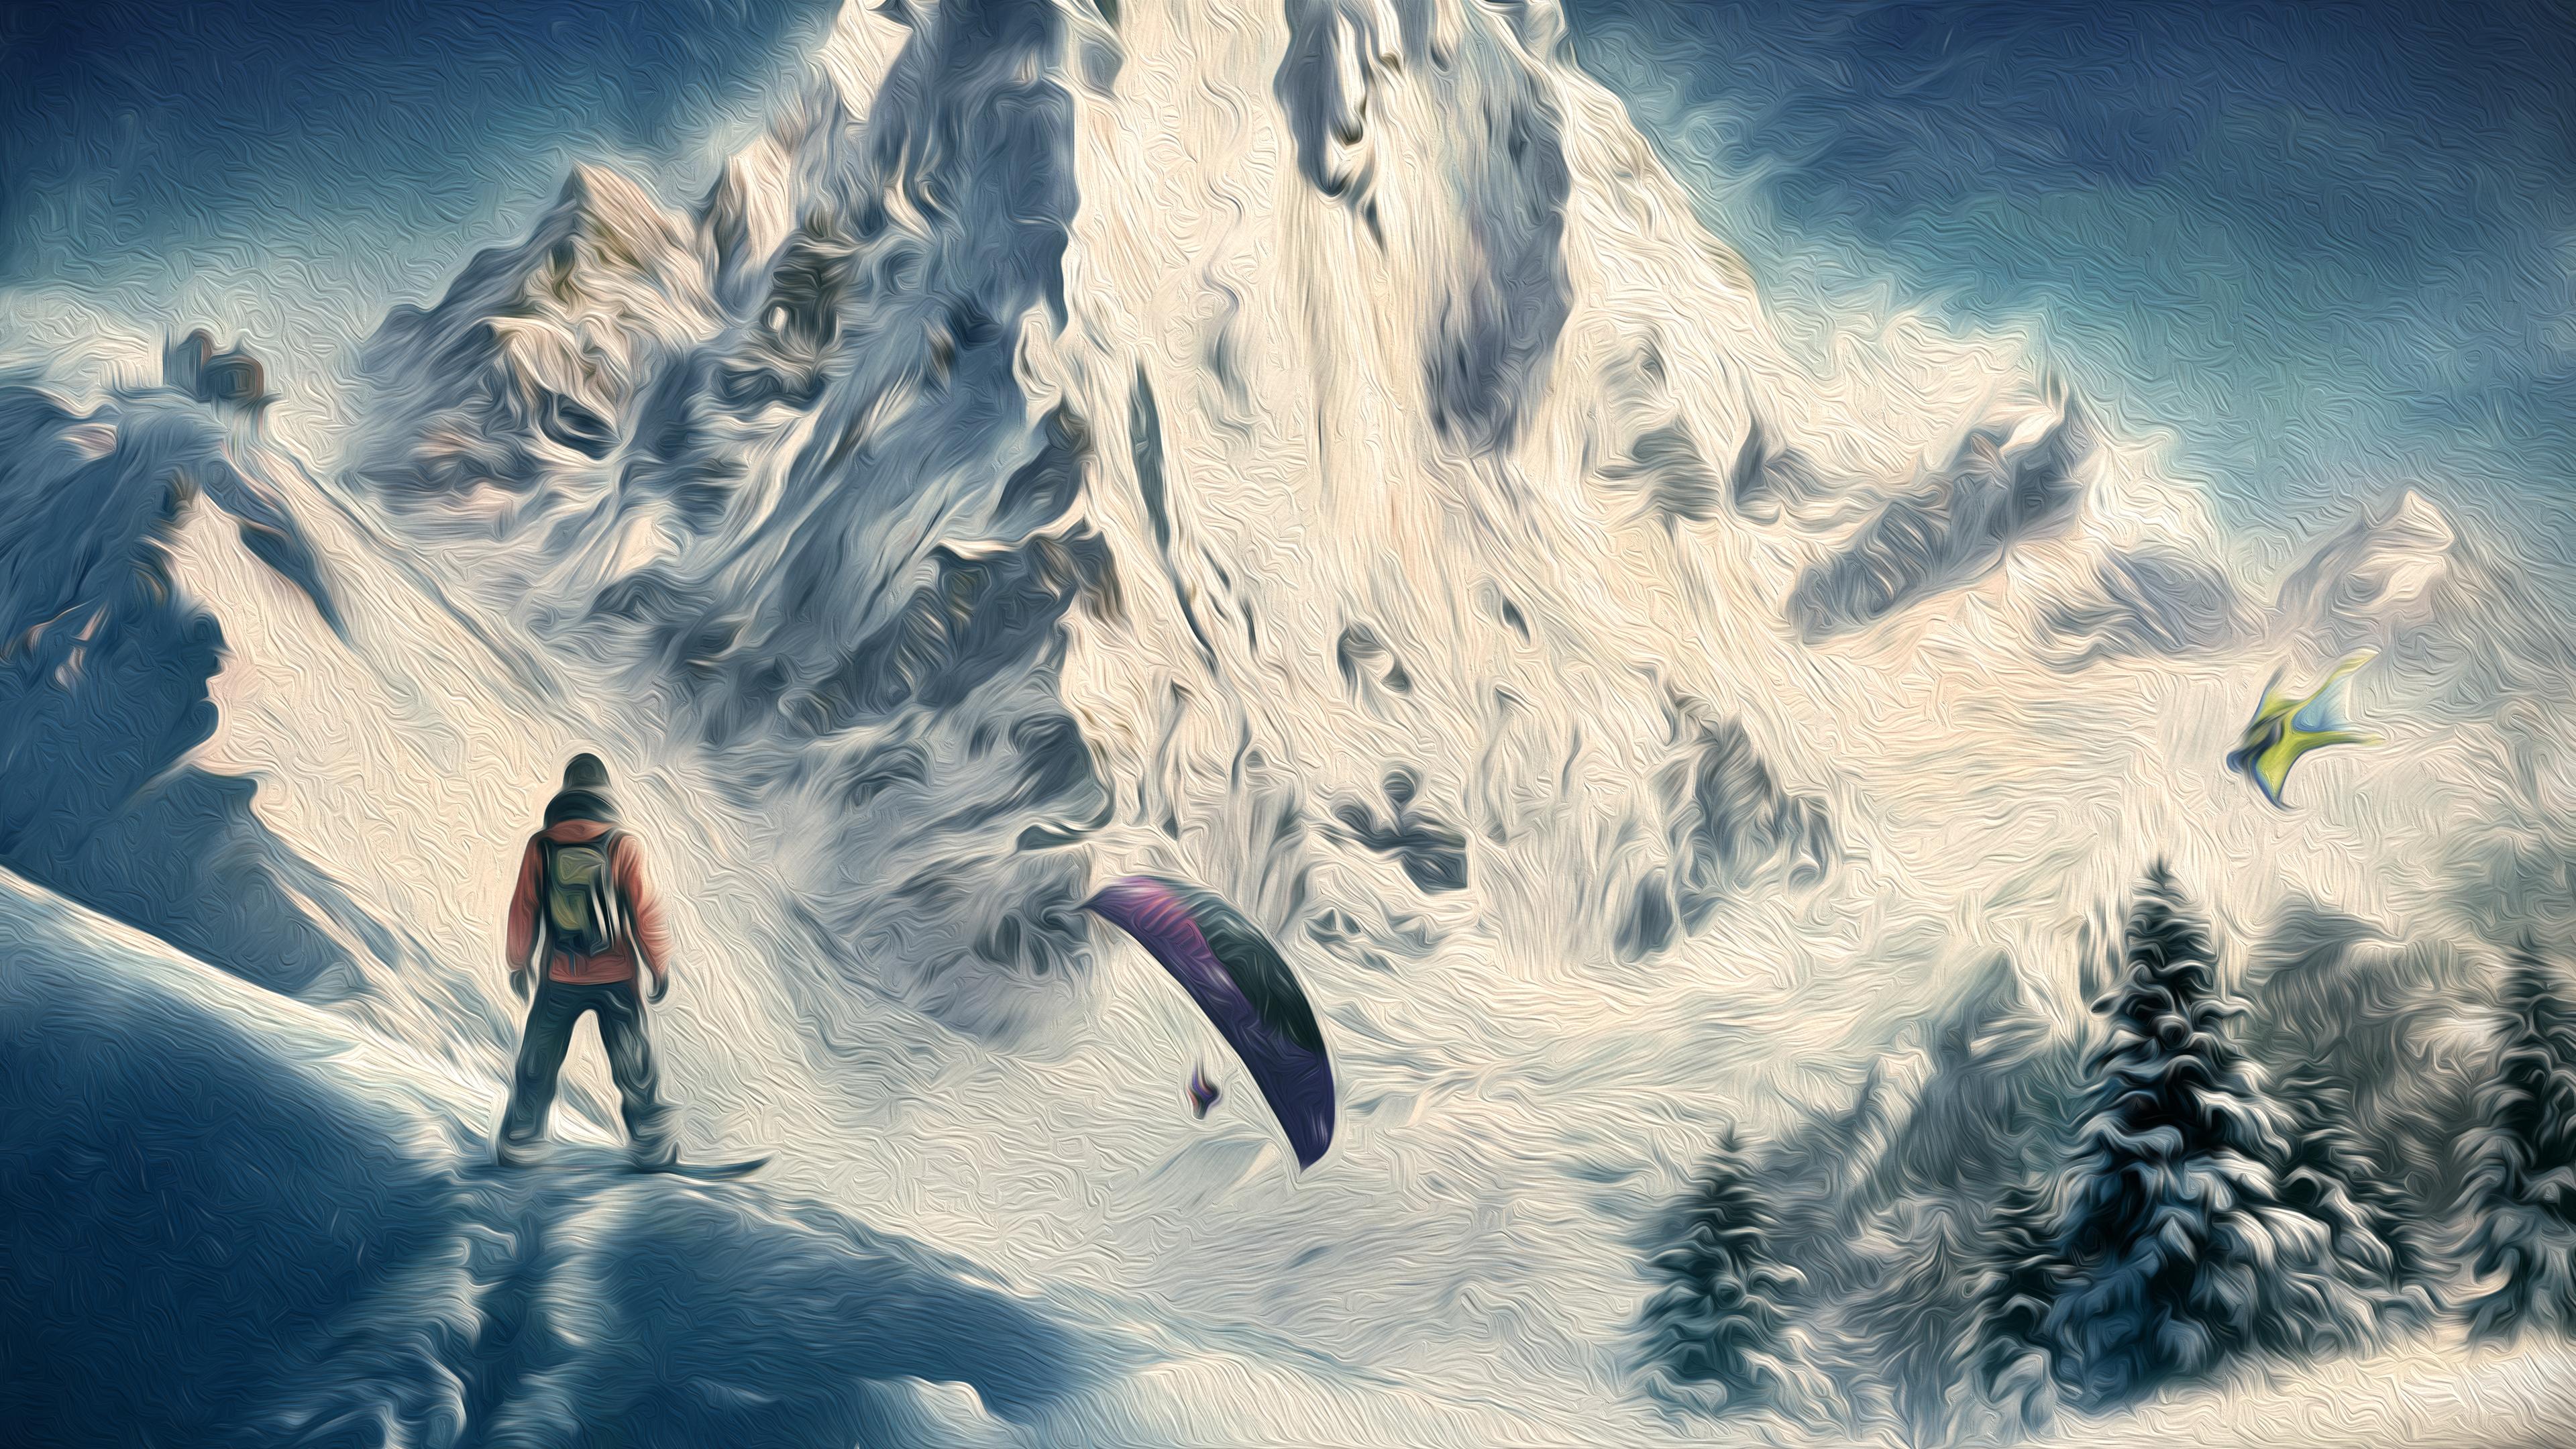 I took the Steep 4K wallpaper and made it an oil painting, I think Bob Ross would be proud :)